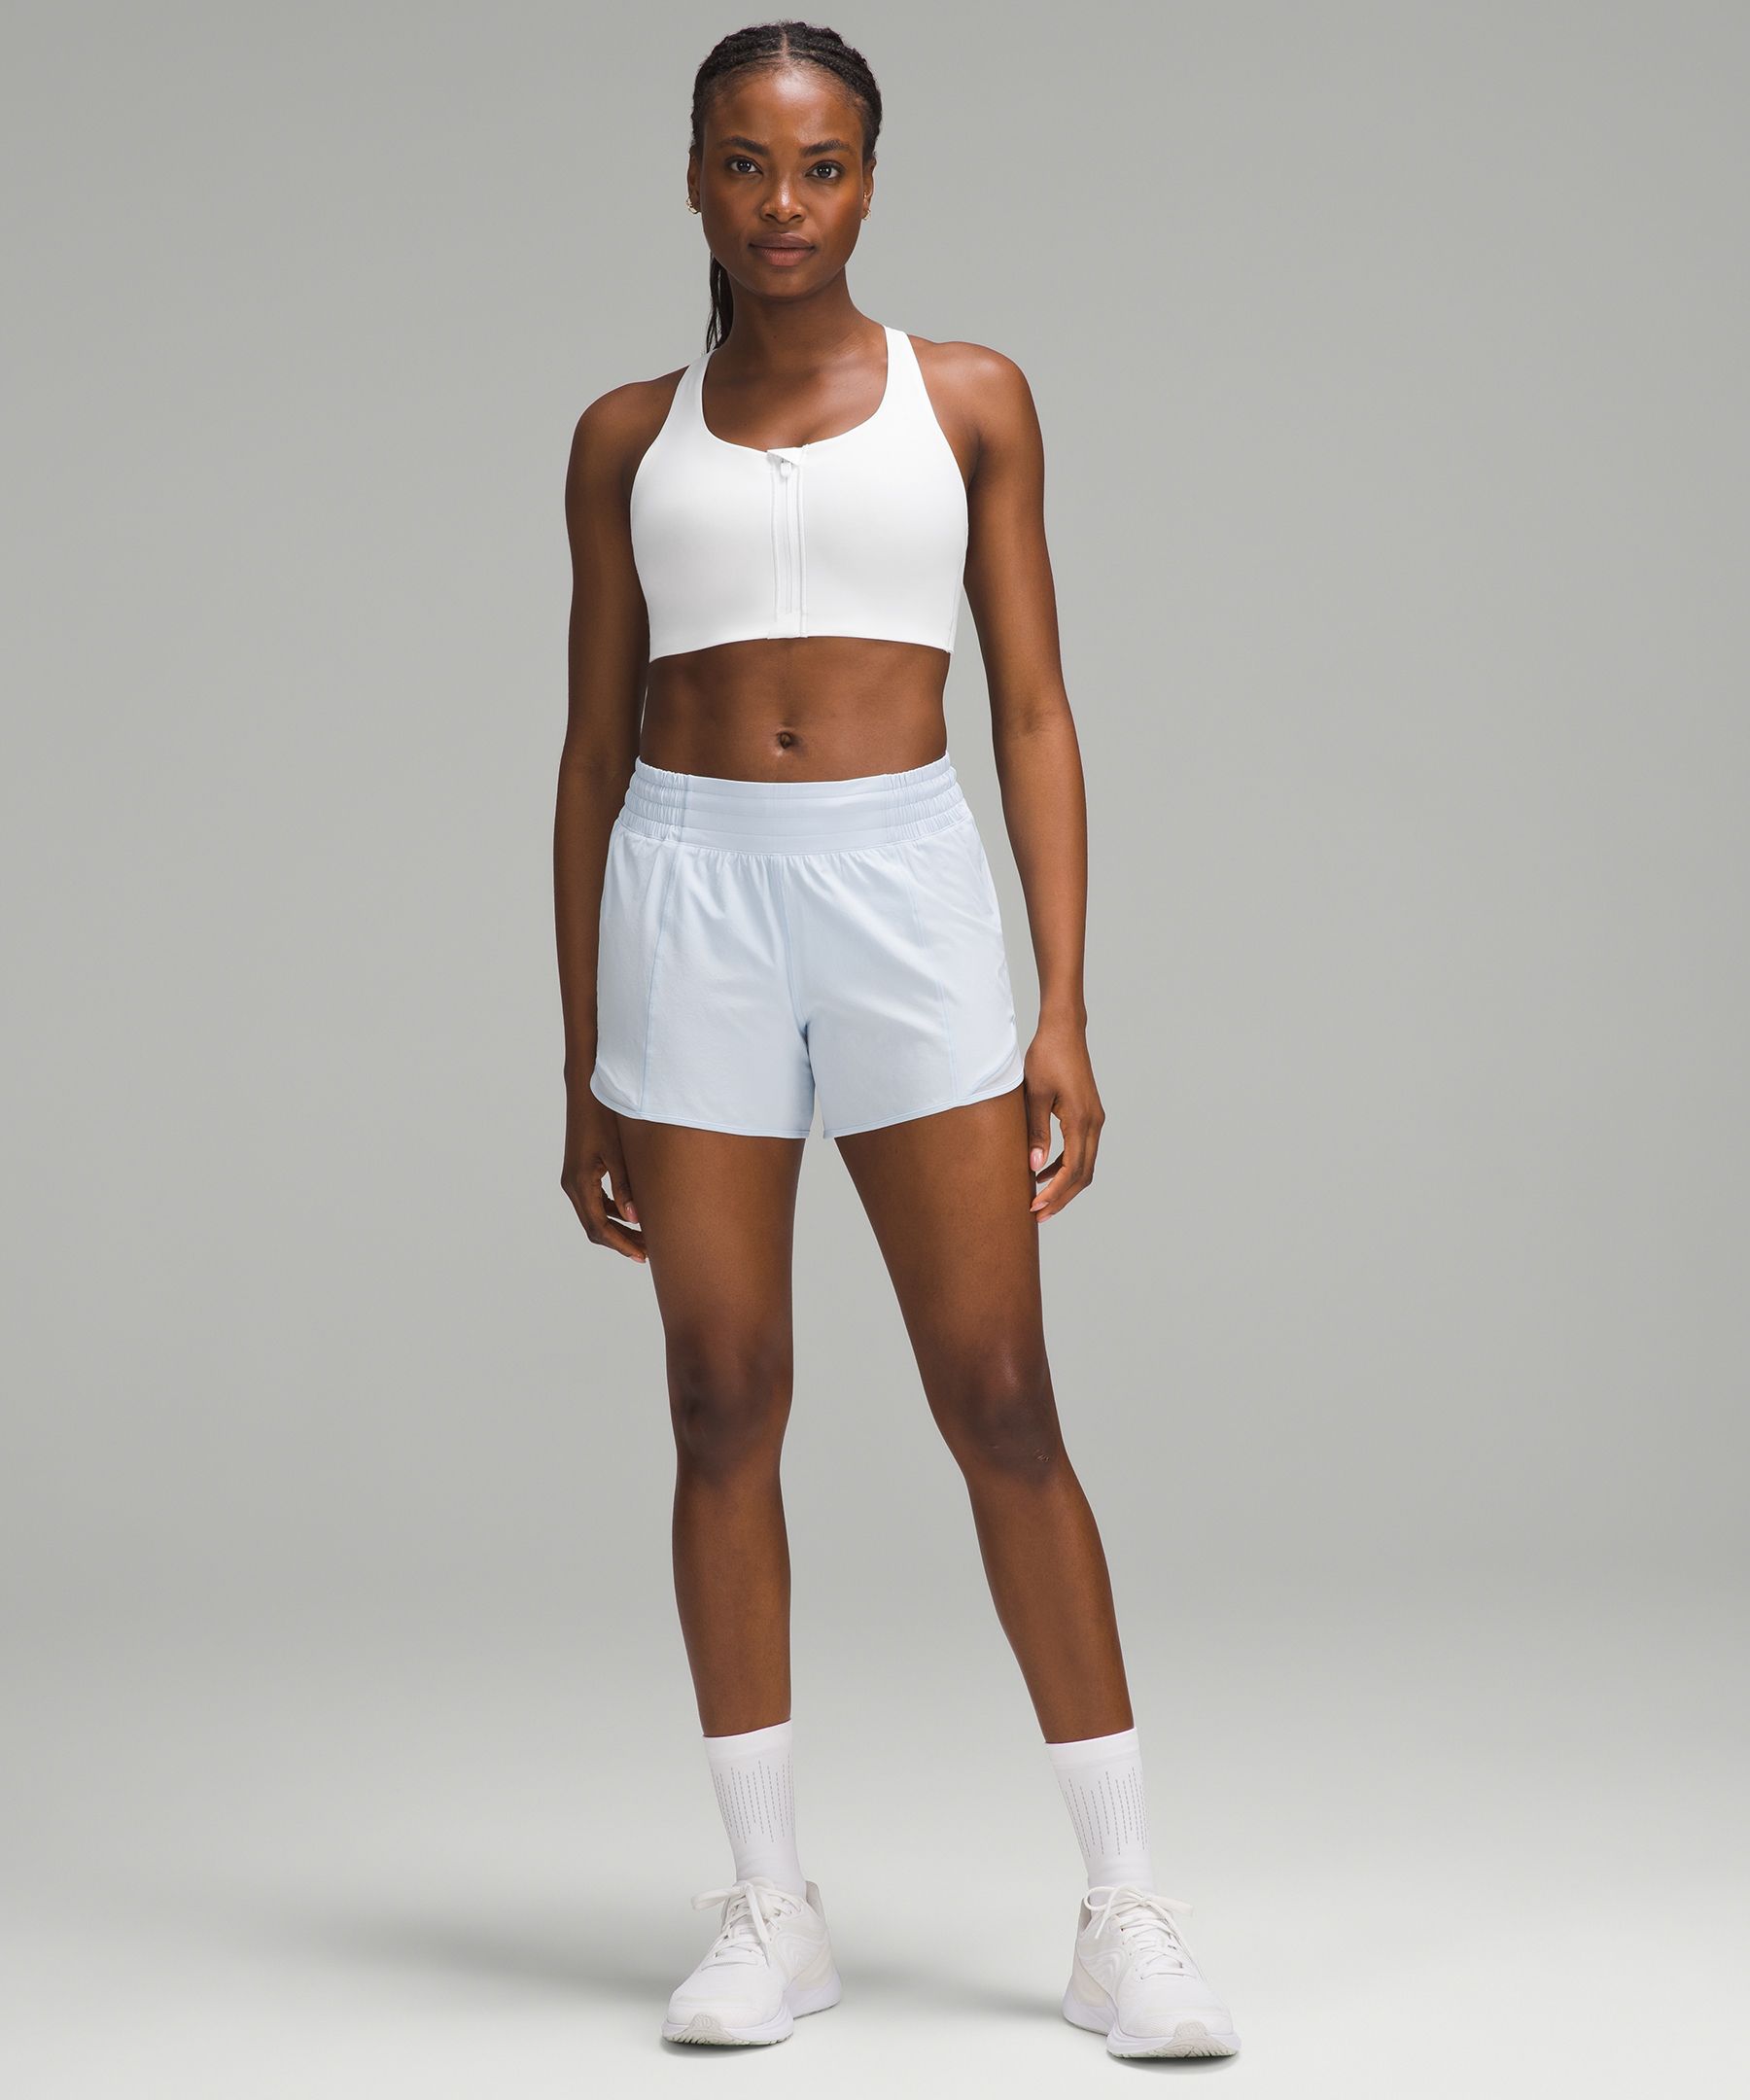 Woman in white sports bra and white shorts holding black and white